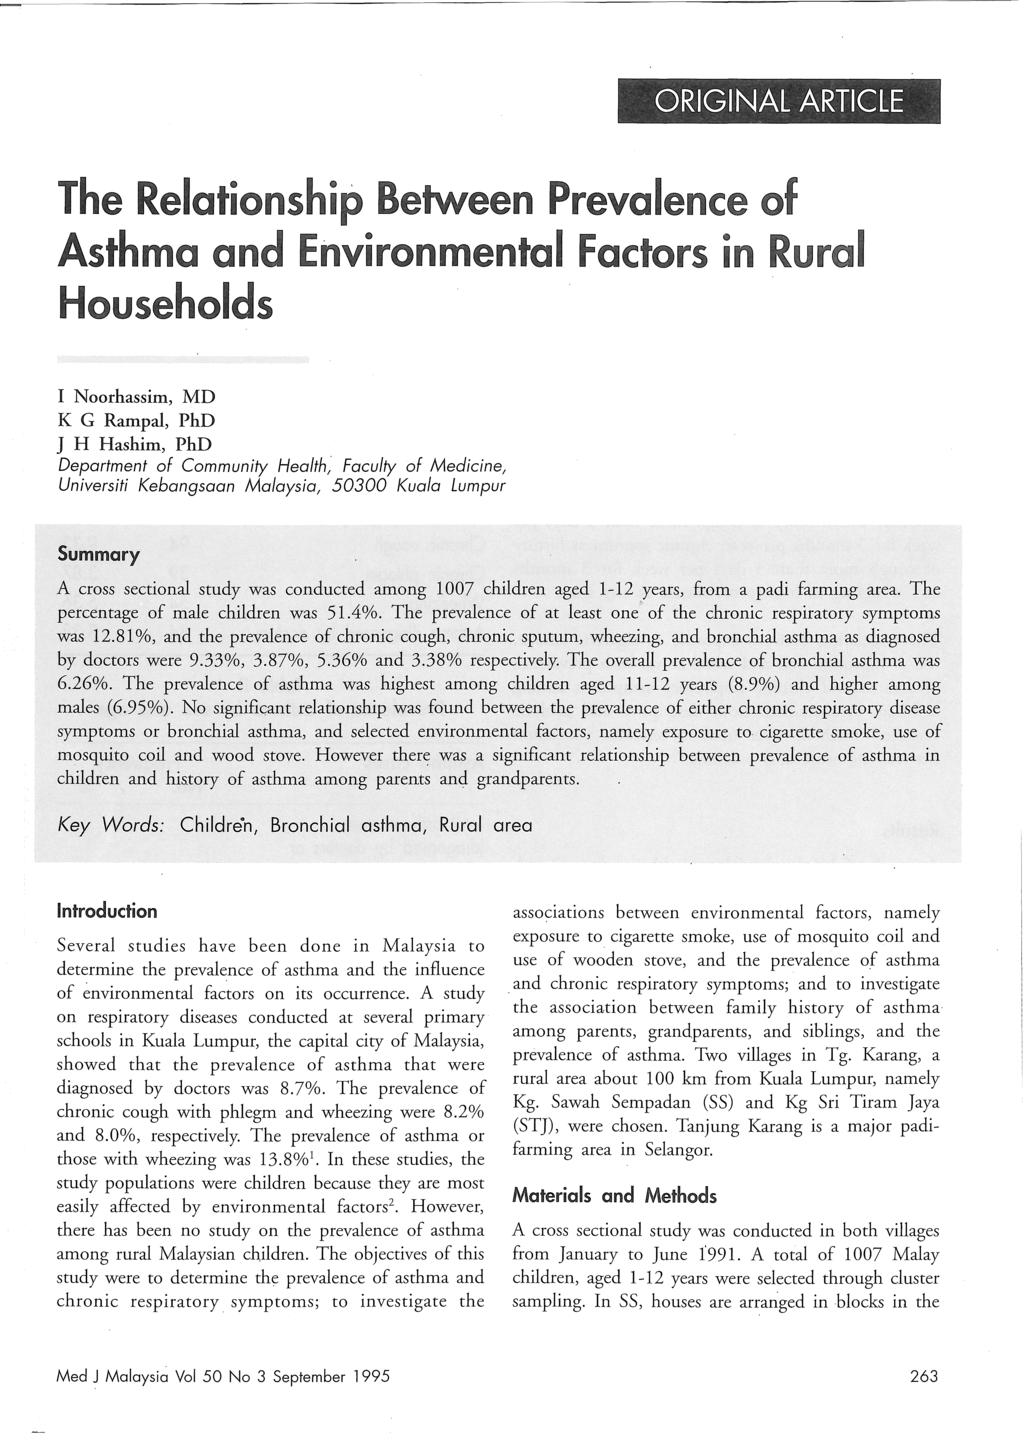 The Relationship Between Asthma and Environmental Factors in Rural Households I Noorhassim, MD K G Rampal, PhD J H Hashim, PhD Department of Community Health; Faculty of Medicine, Universiti